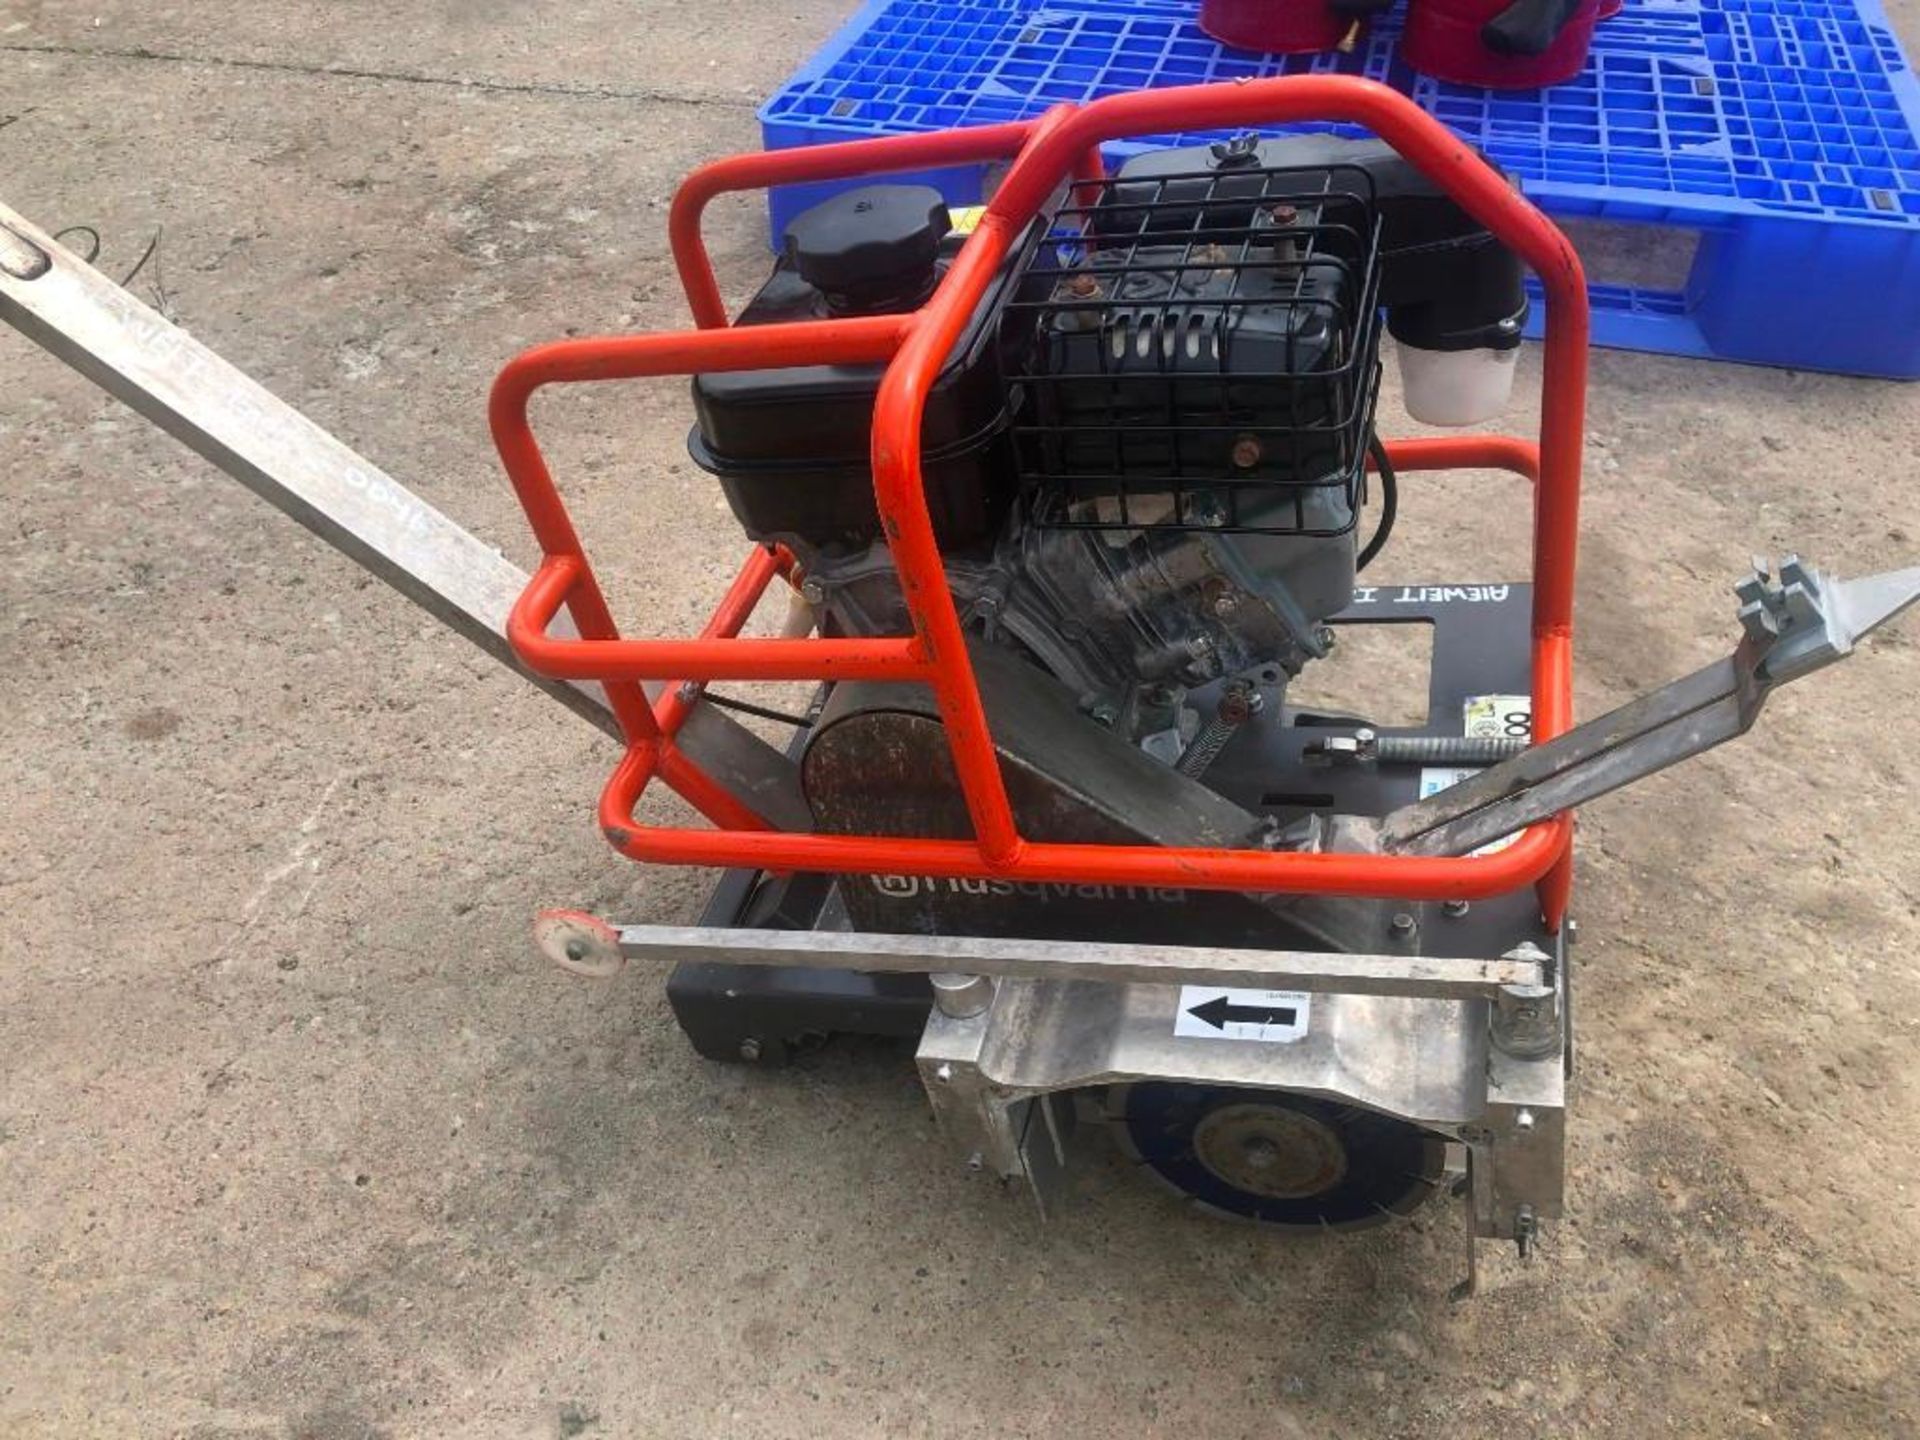 Husqvarna Soff-Cut 150 Concrete Saw, Serial #20180300046, Model Soff-Cut 150. Located at 301 E Henry - Image 3 of 5